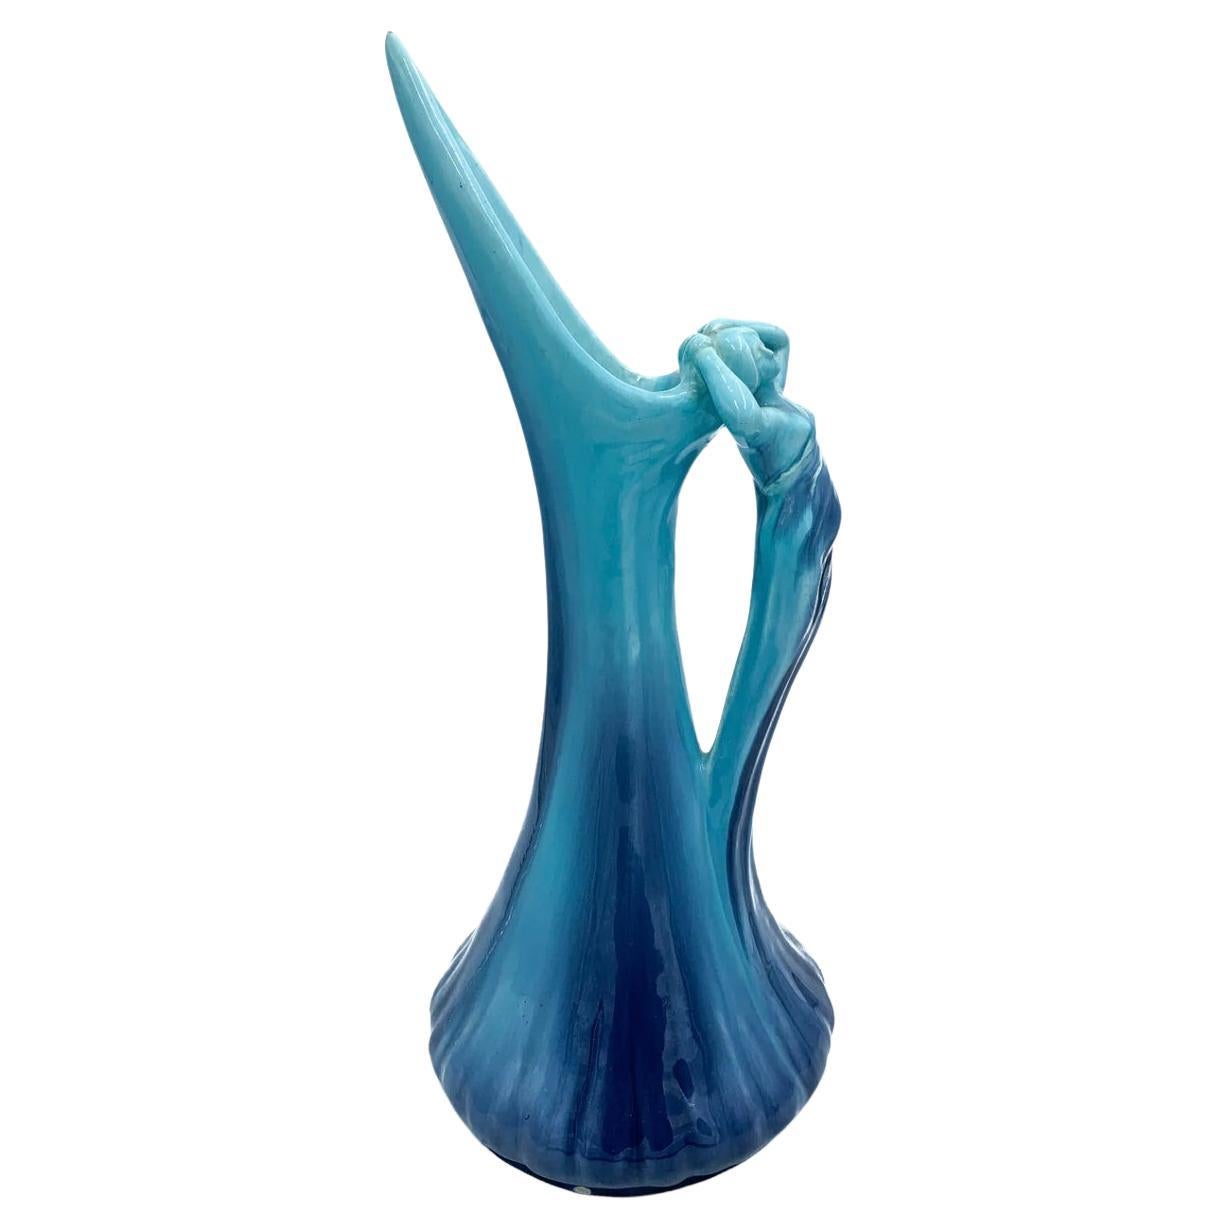 Vallauris Blue Ceramic Pitcher from the 1950s For Sale